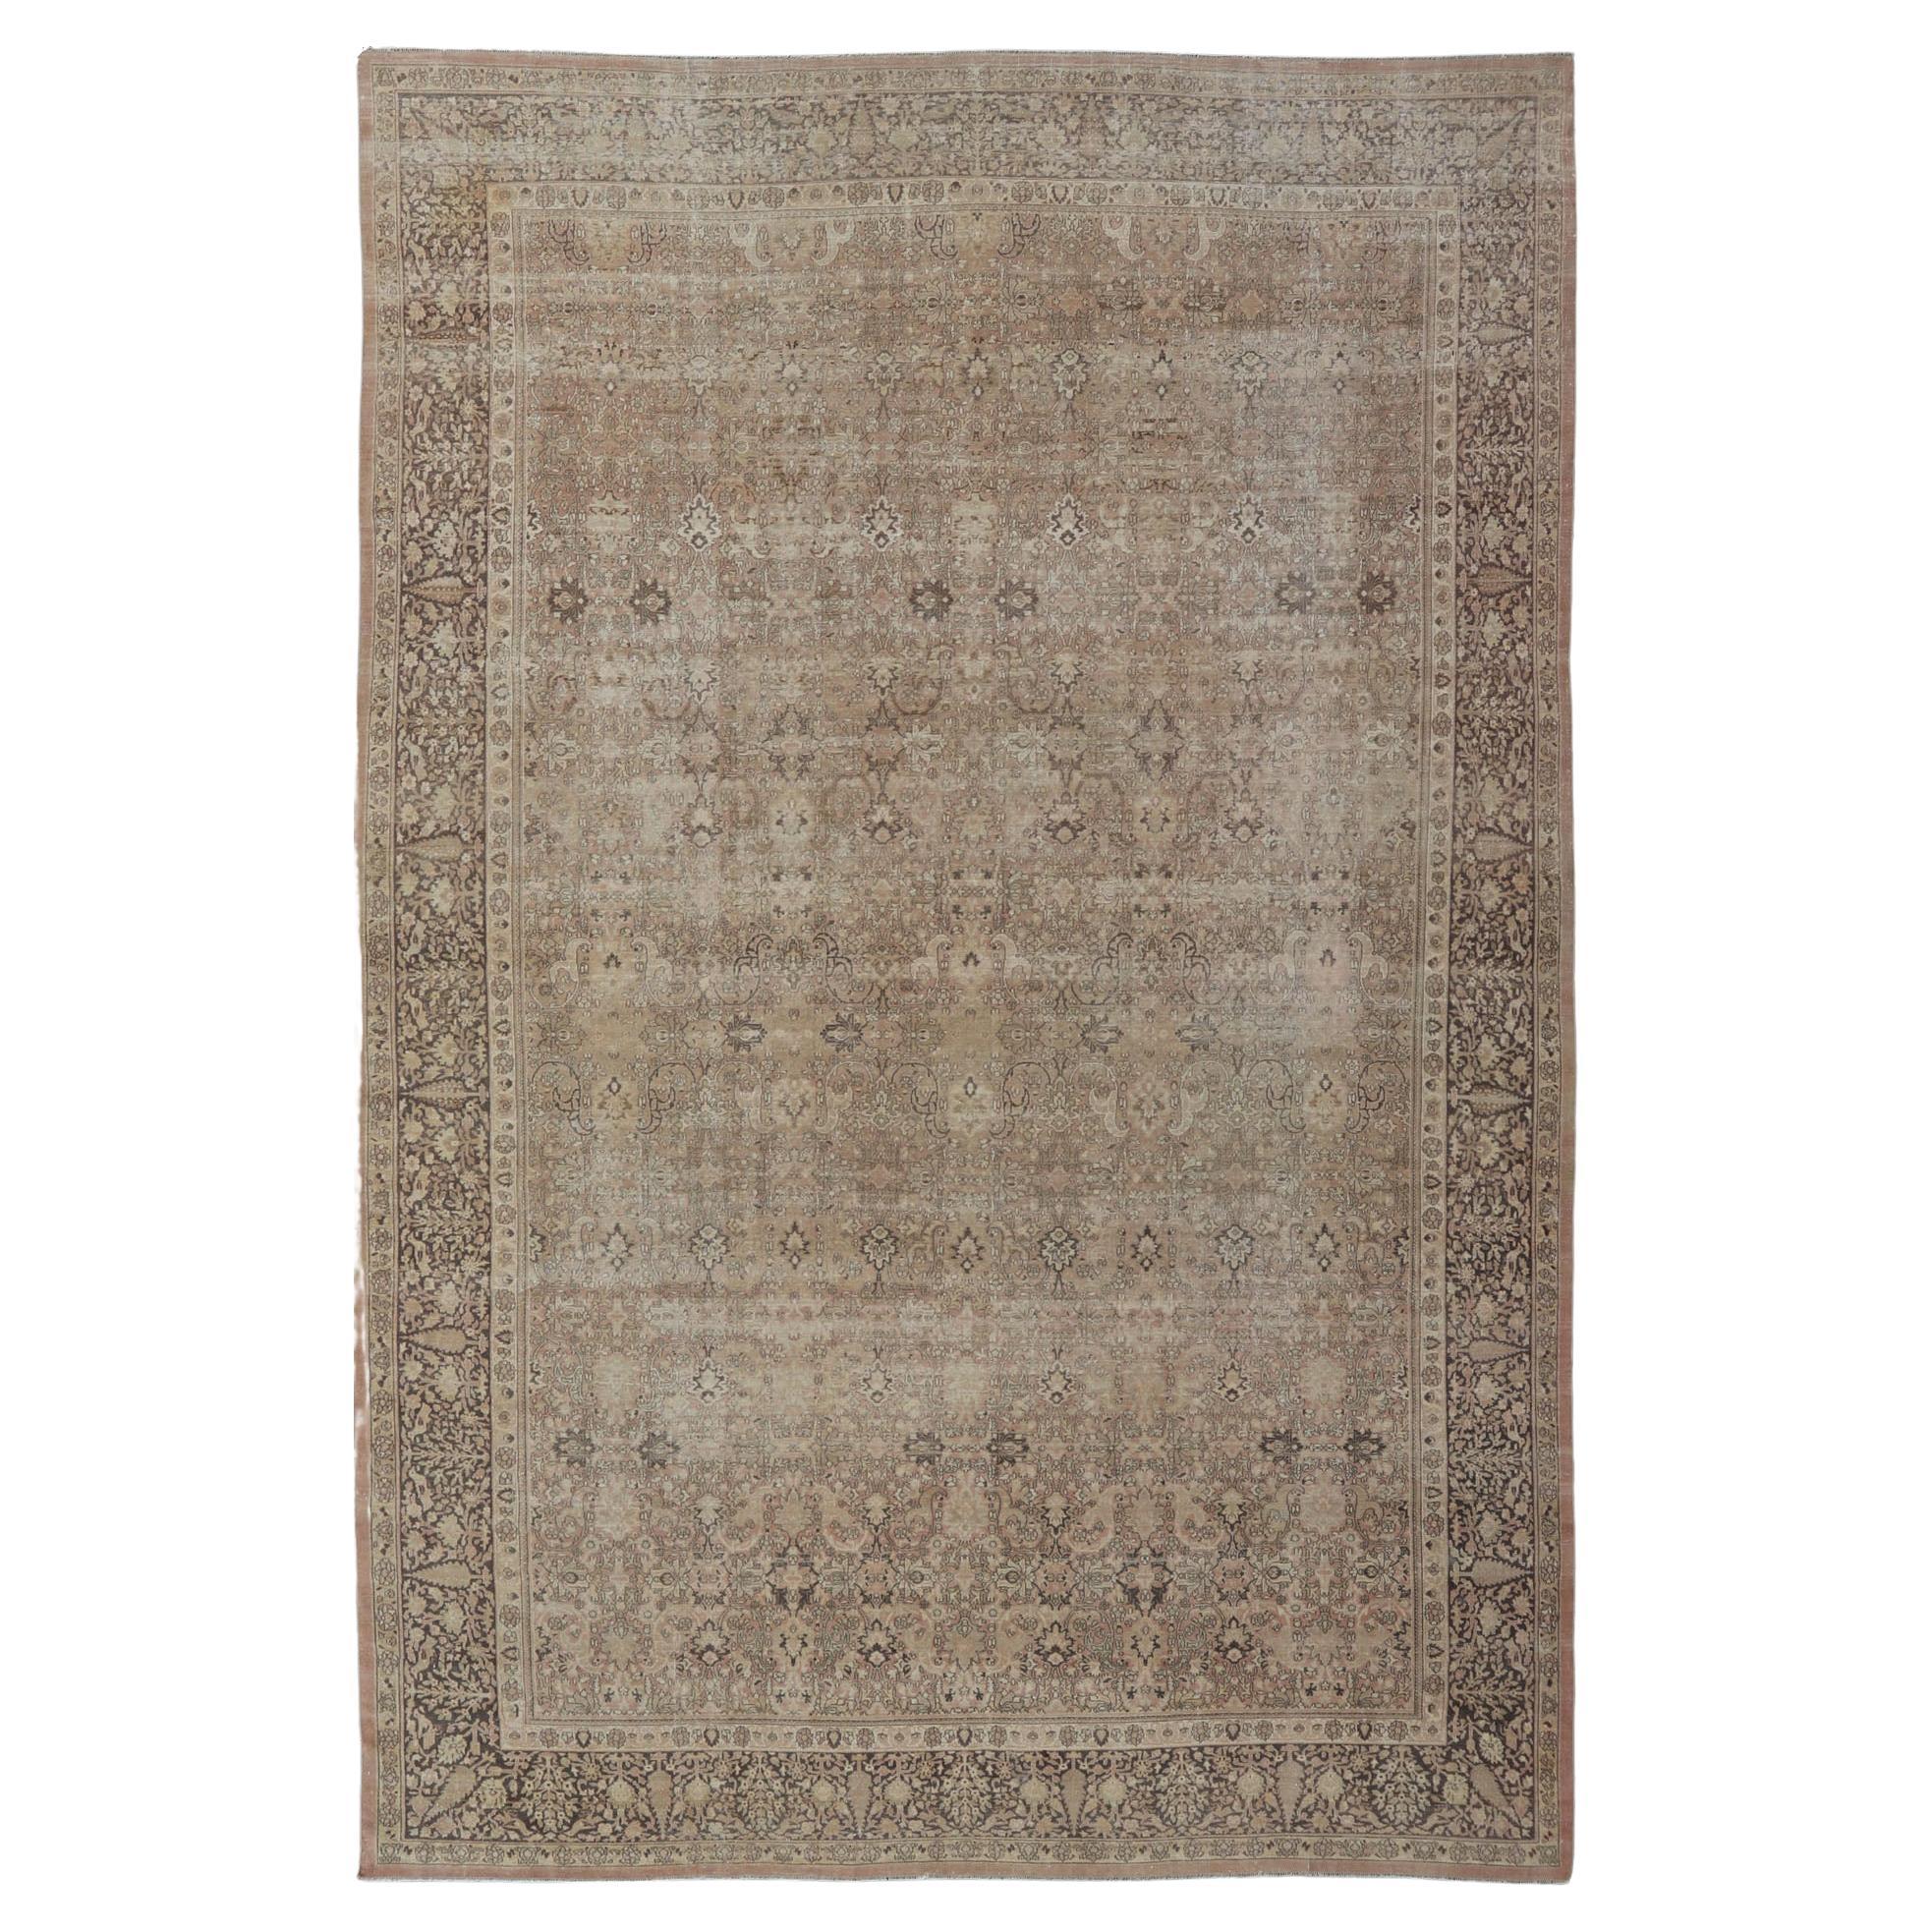 Large Antique Turkish Sivas Rug with Floral Design in Earthy Neutral Tones  For Sale